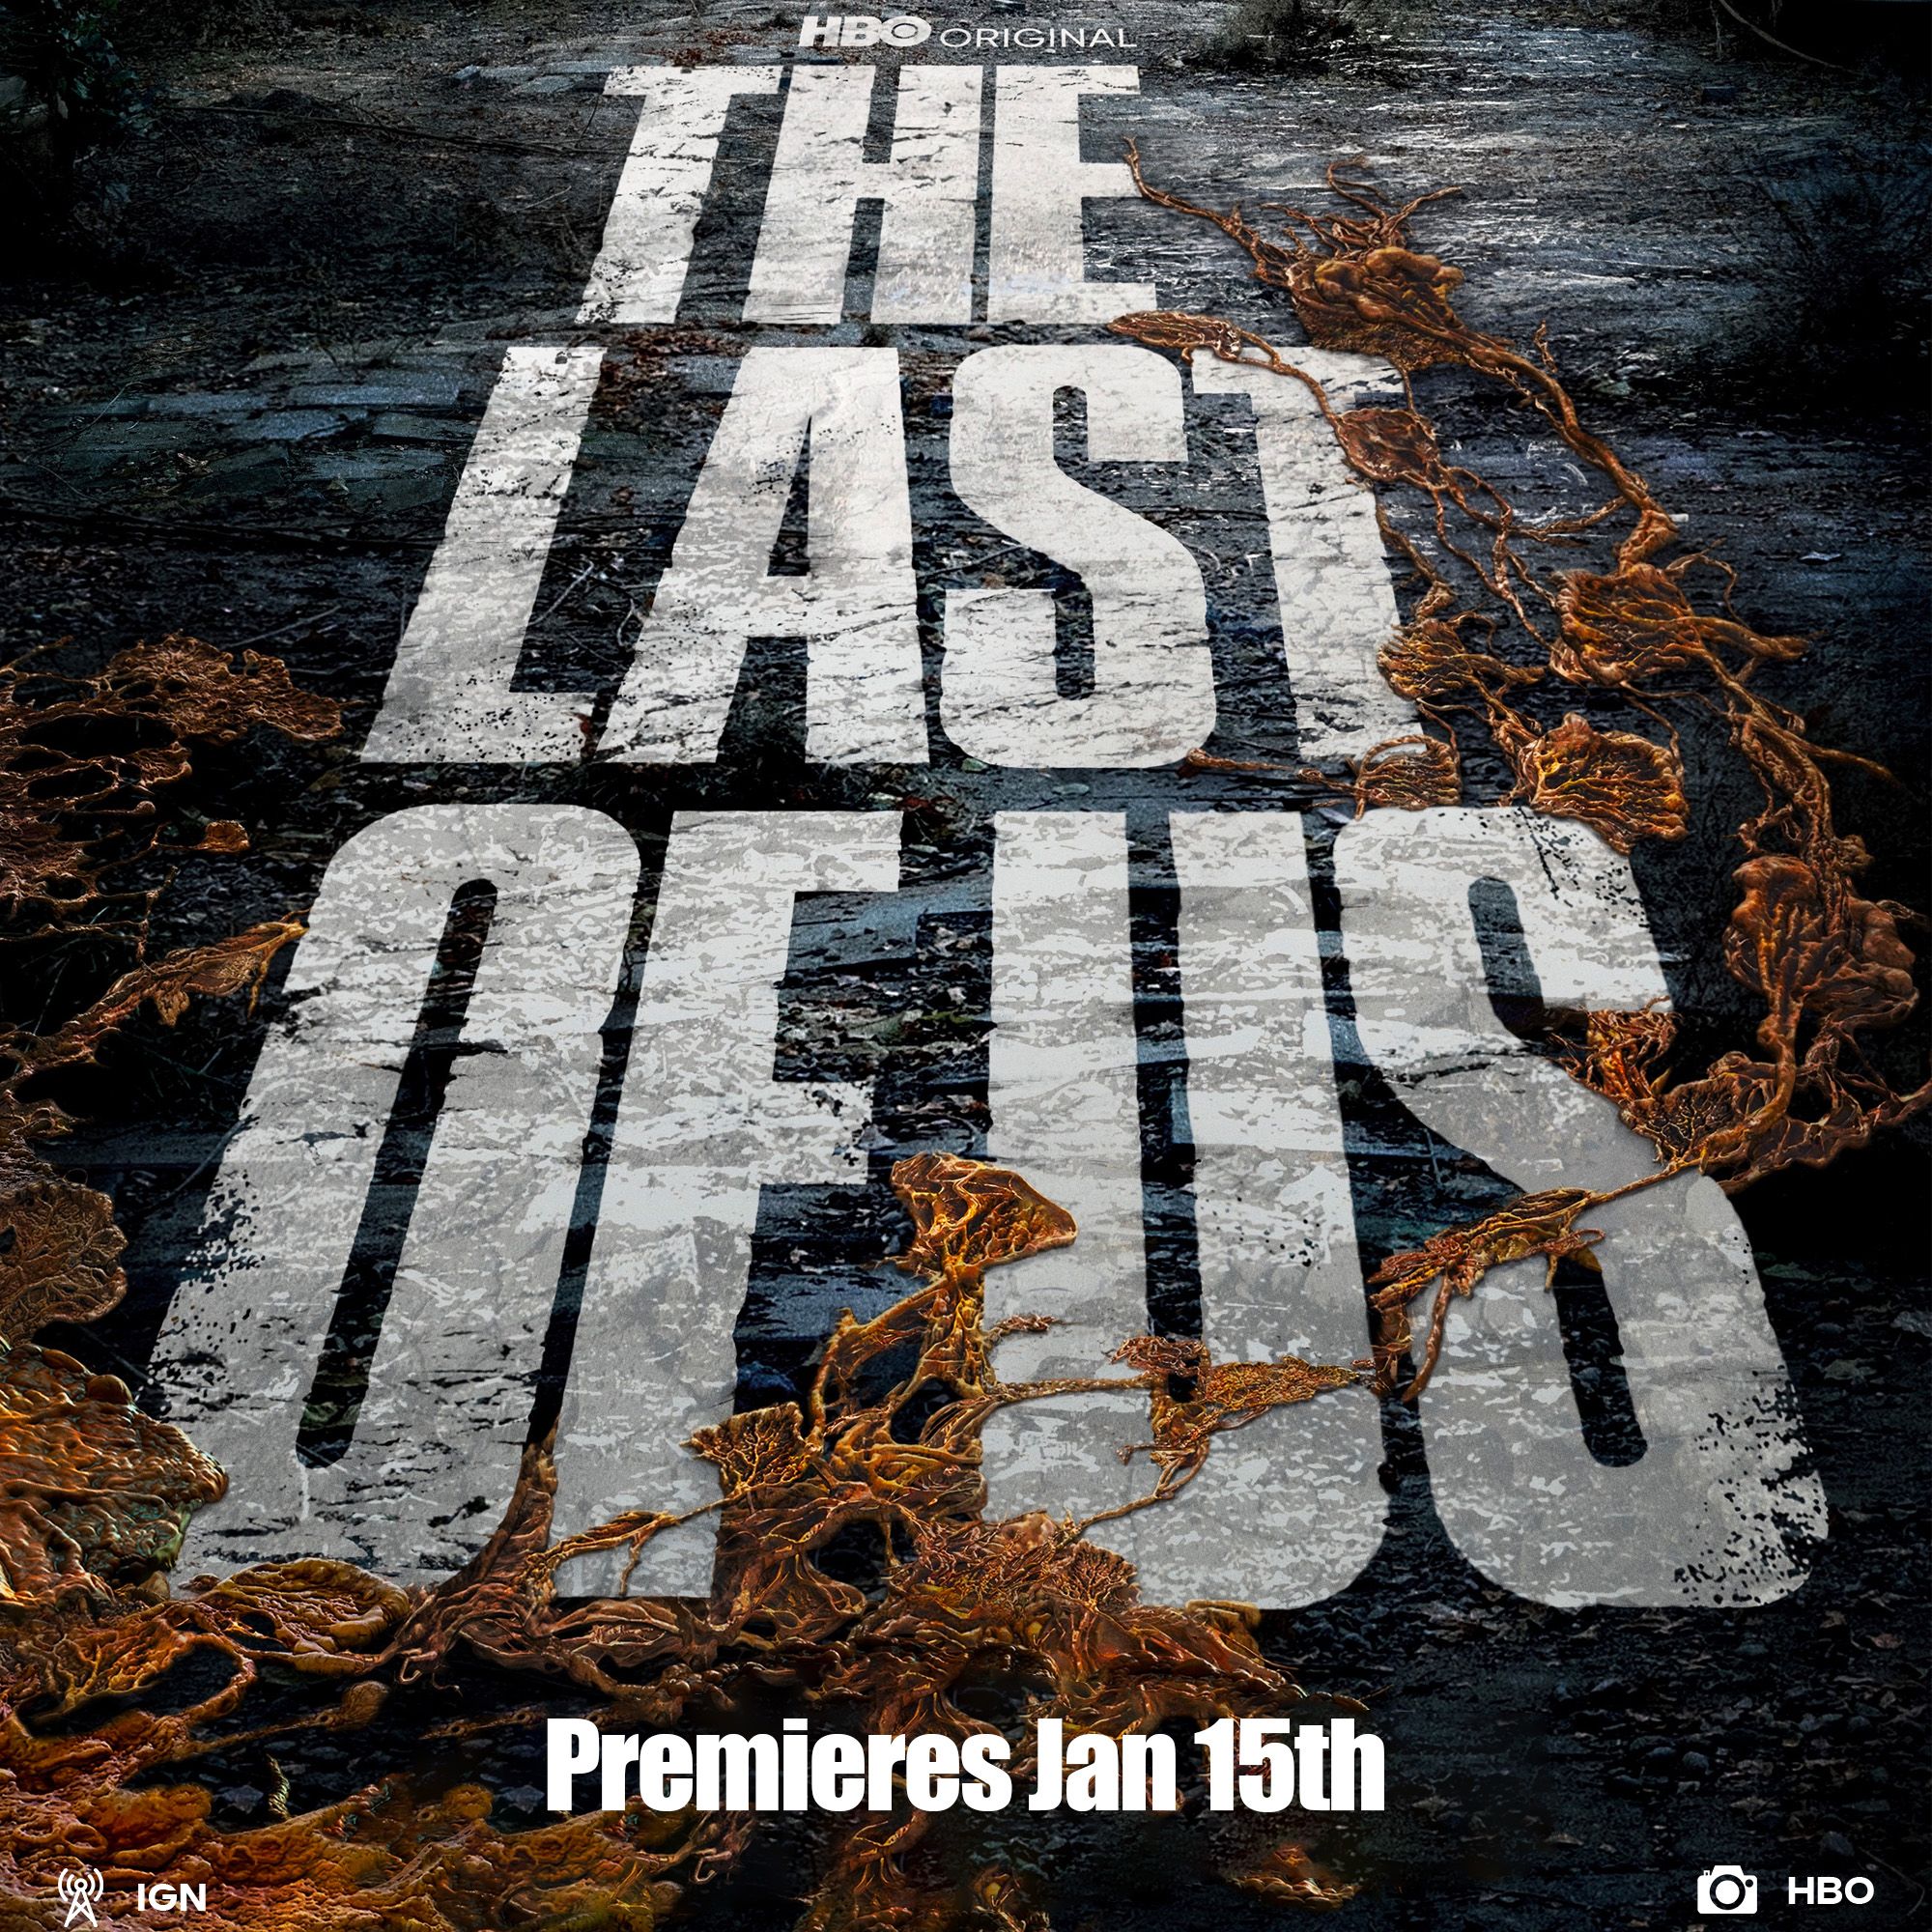 The Last of us TV show premieres January 15th